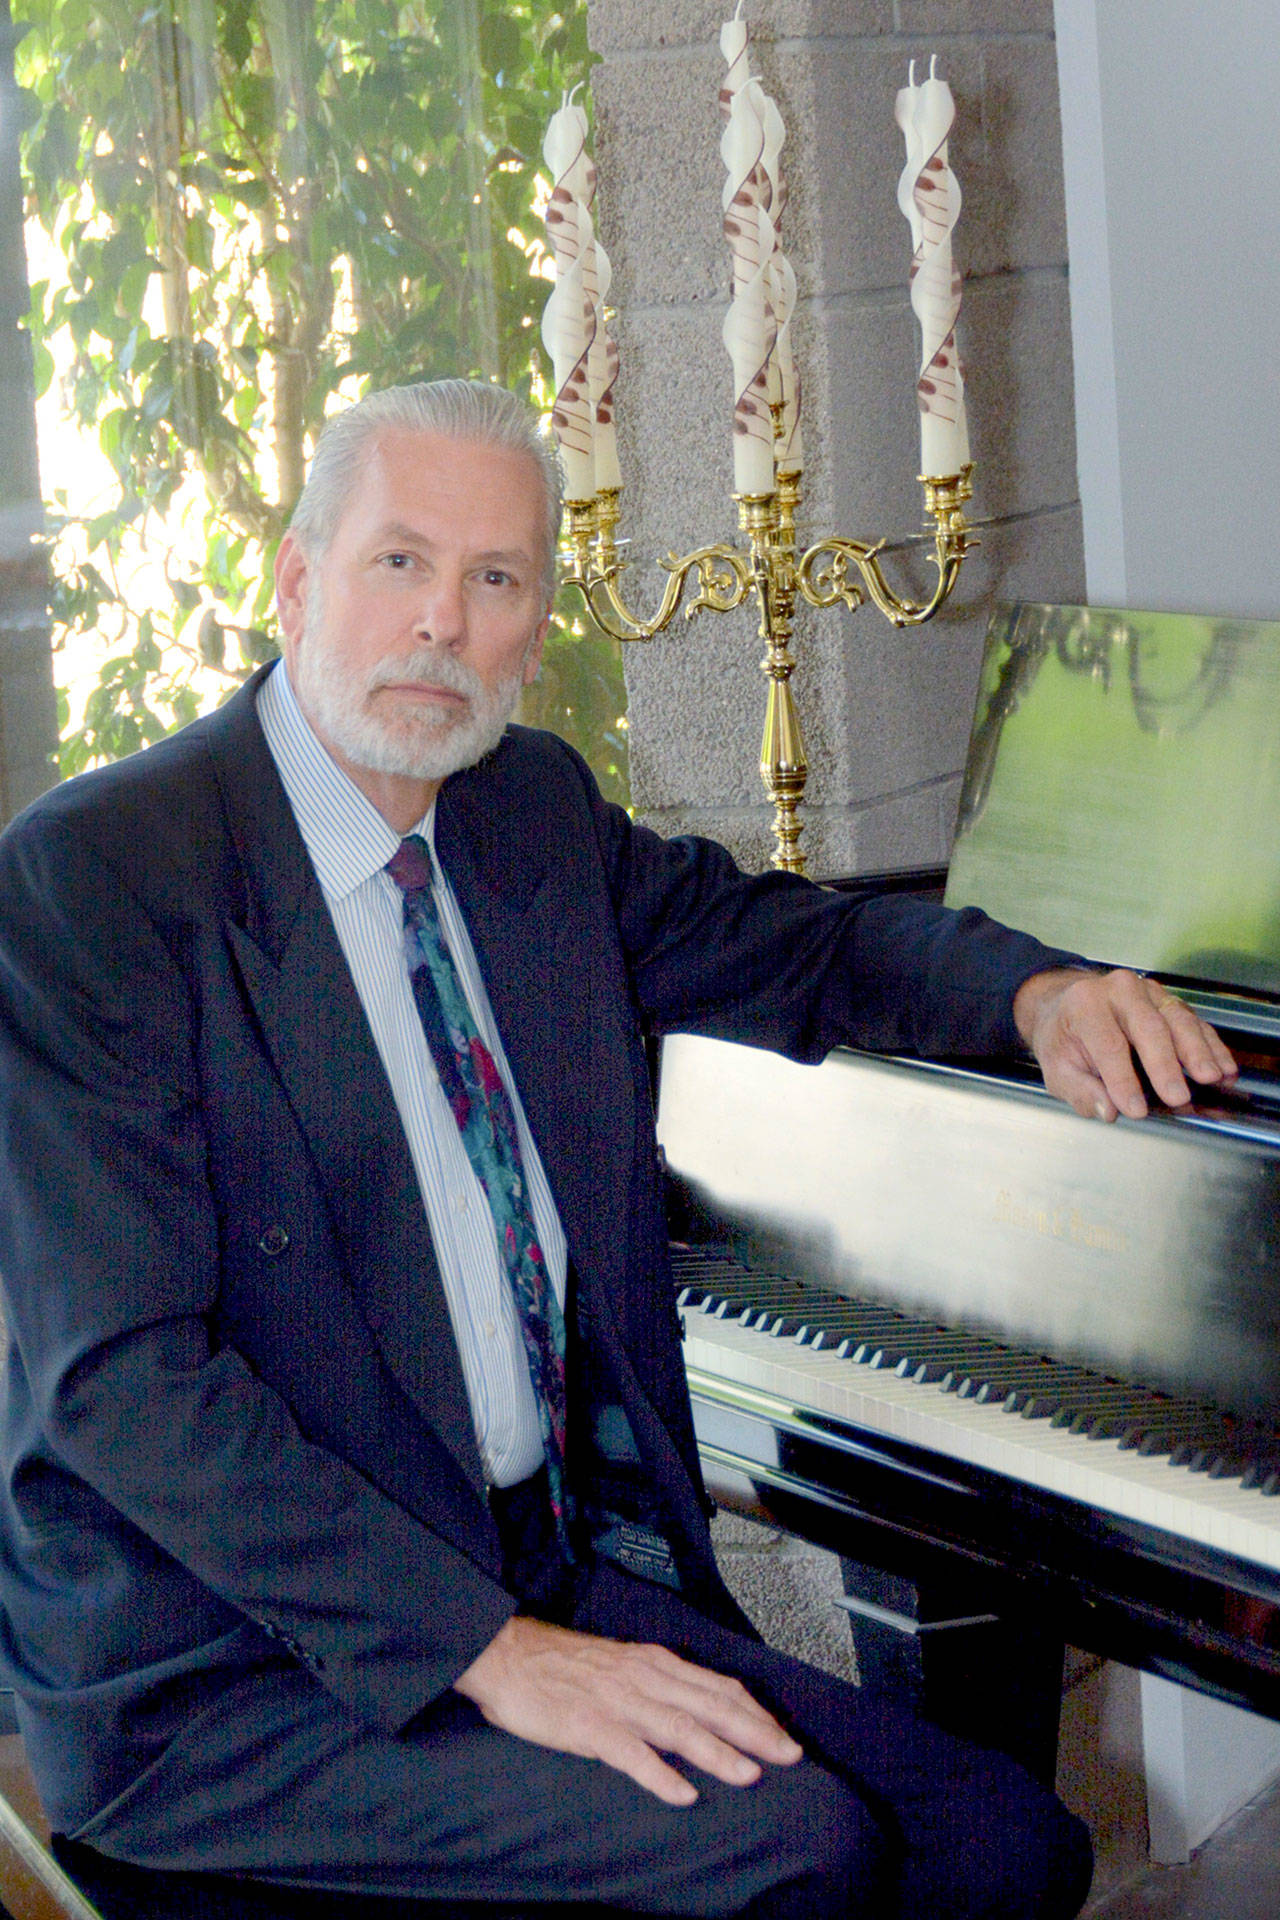 Gary Rtherford will perform on a baroque-style organ Thursday.